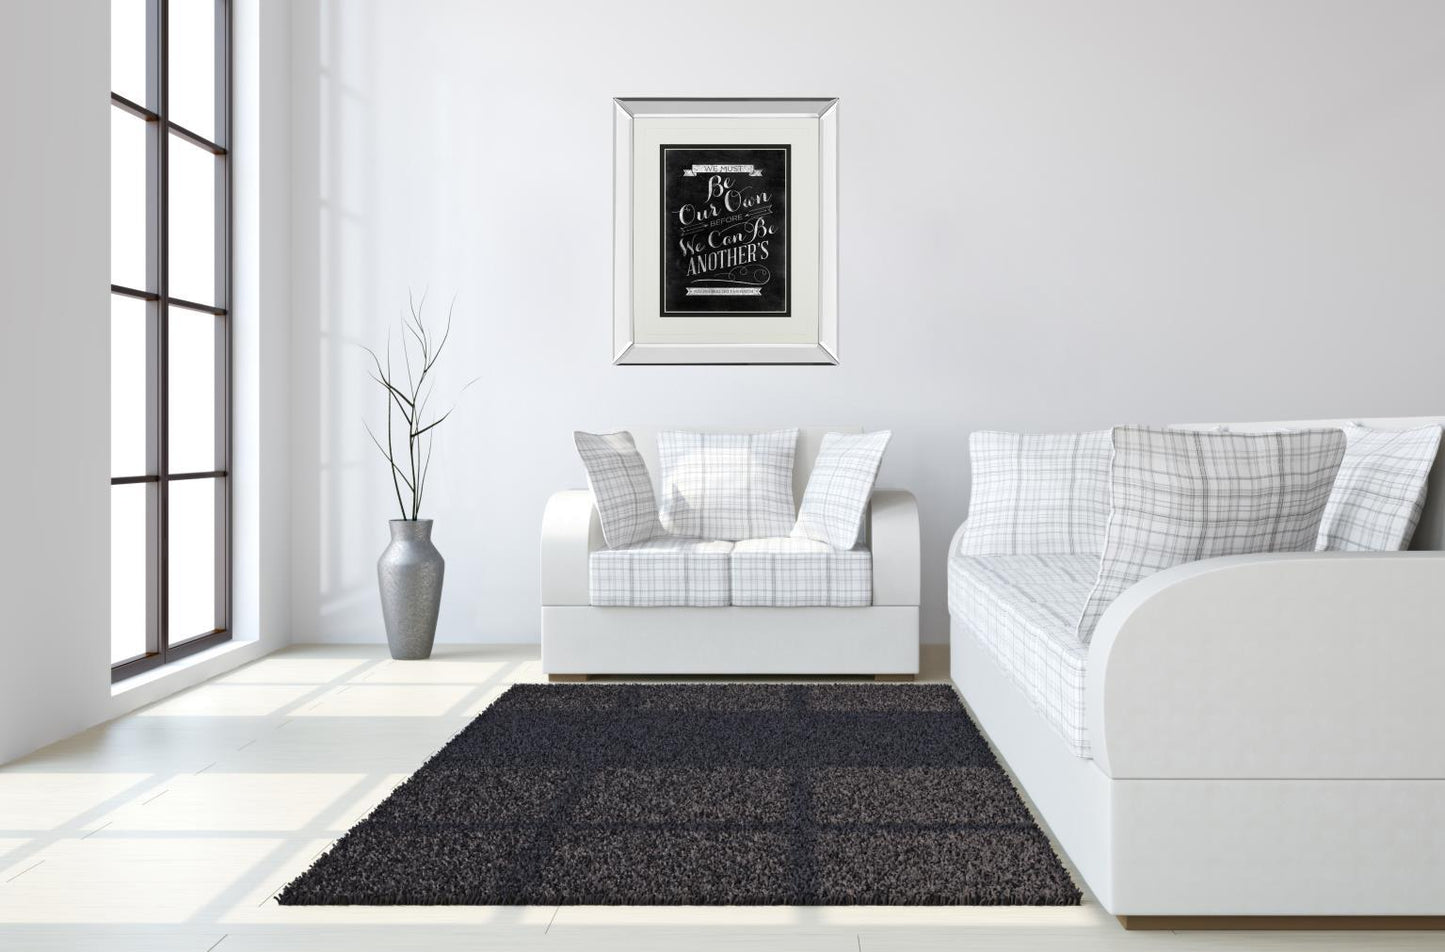 Be Our Own By Sd Graphic - Mirror Framed Print Wall Art - Black